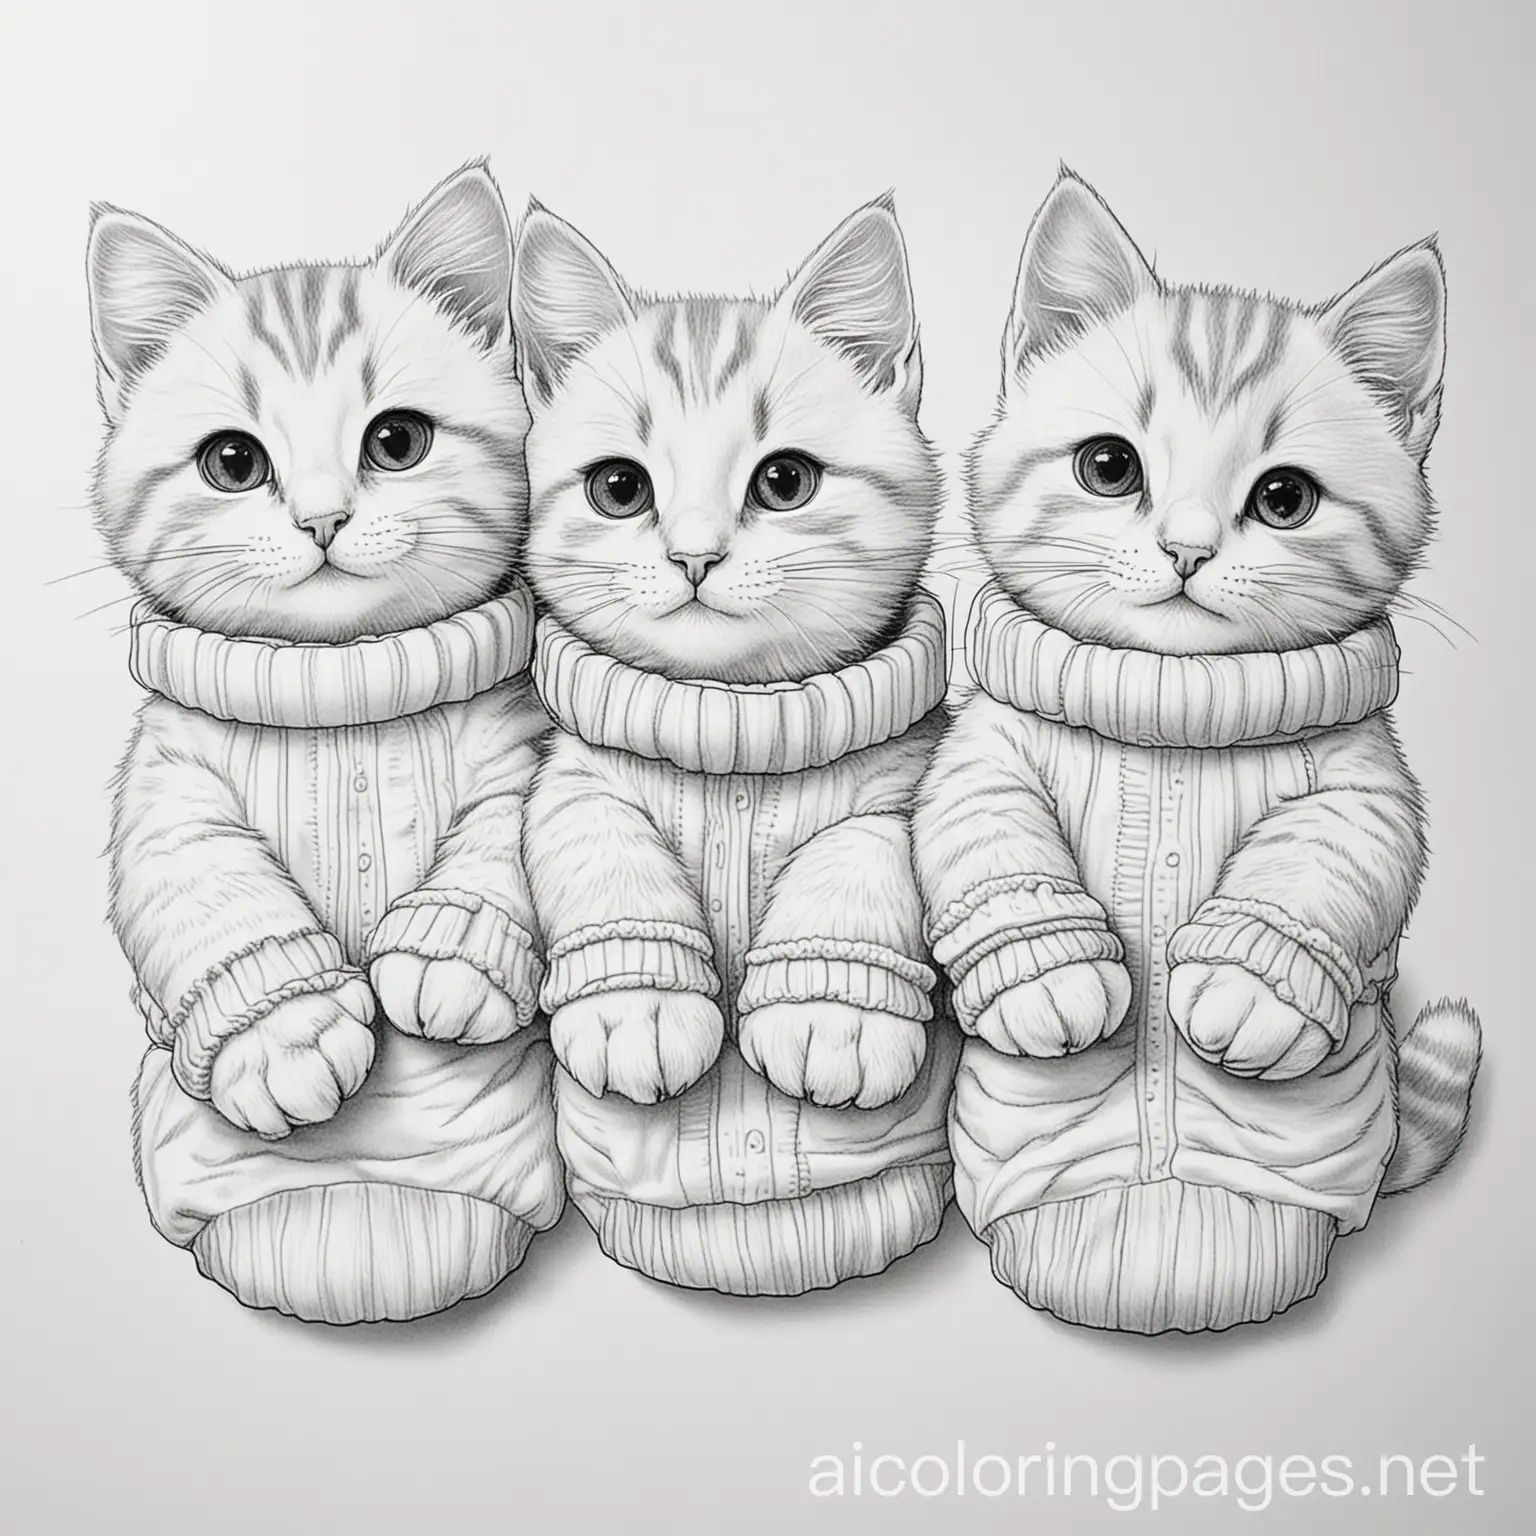 Three-Kittens-with-Mittens-Coloring-Page-for-Kids